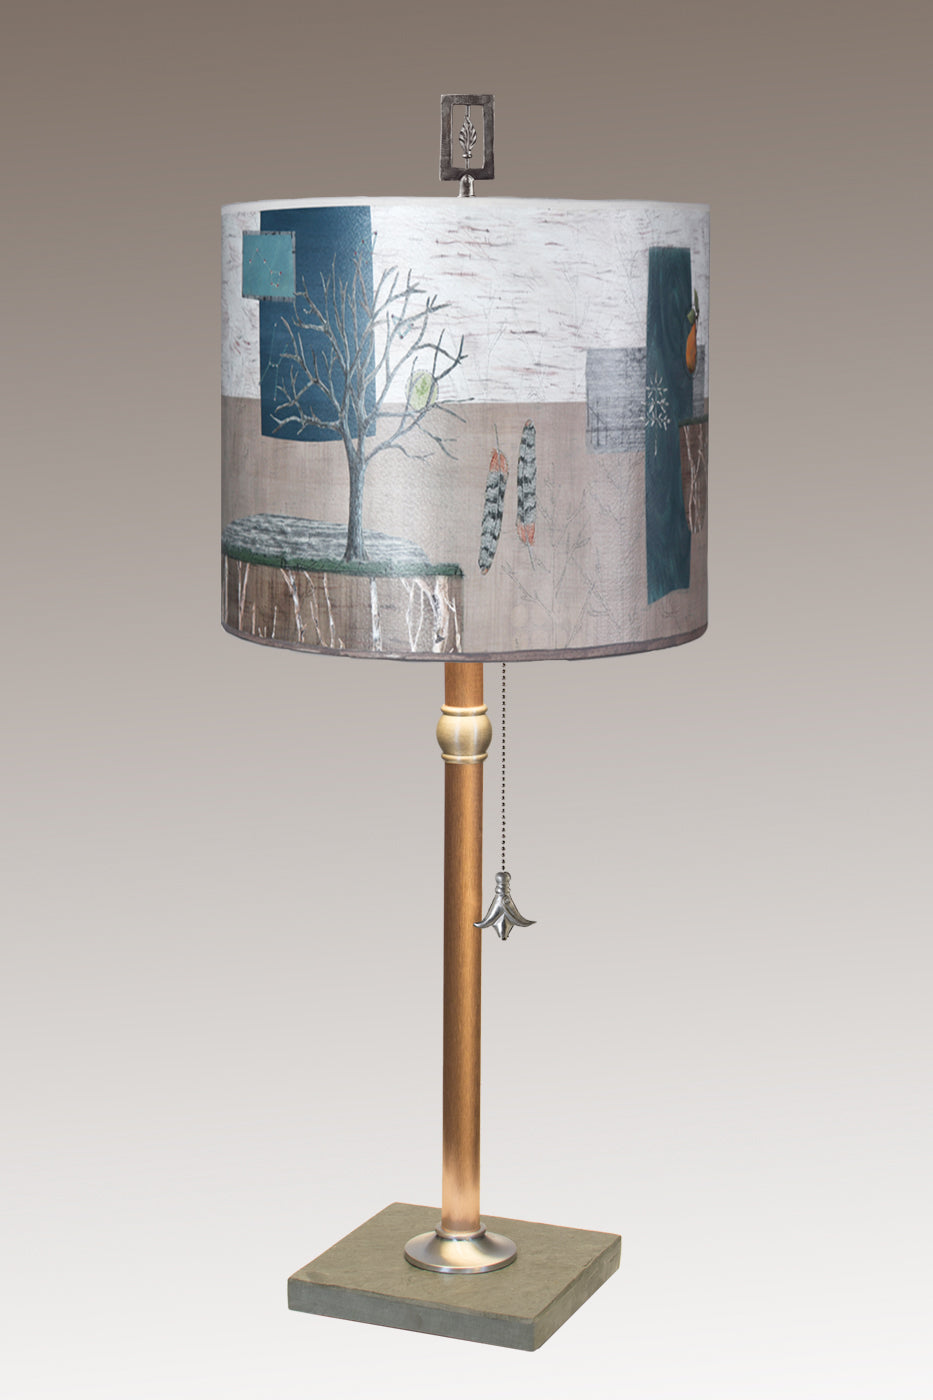 Copper Table Lamp with Medium Drum Shade in Wander in Drift